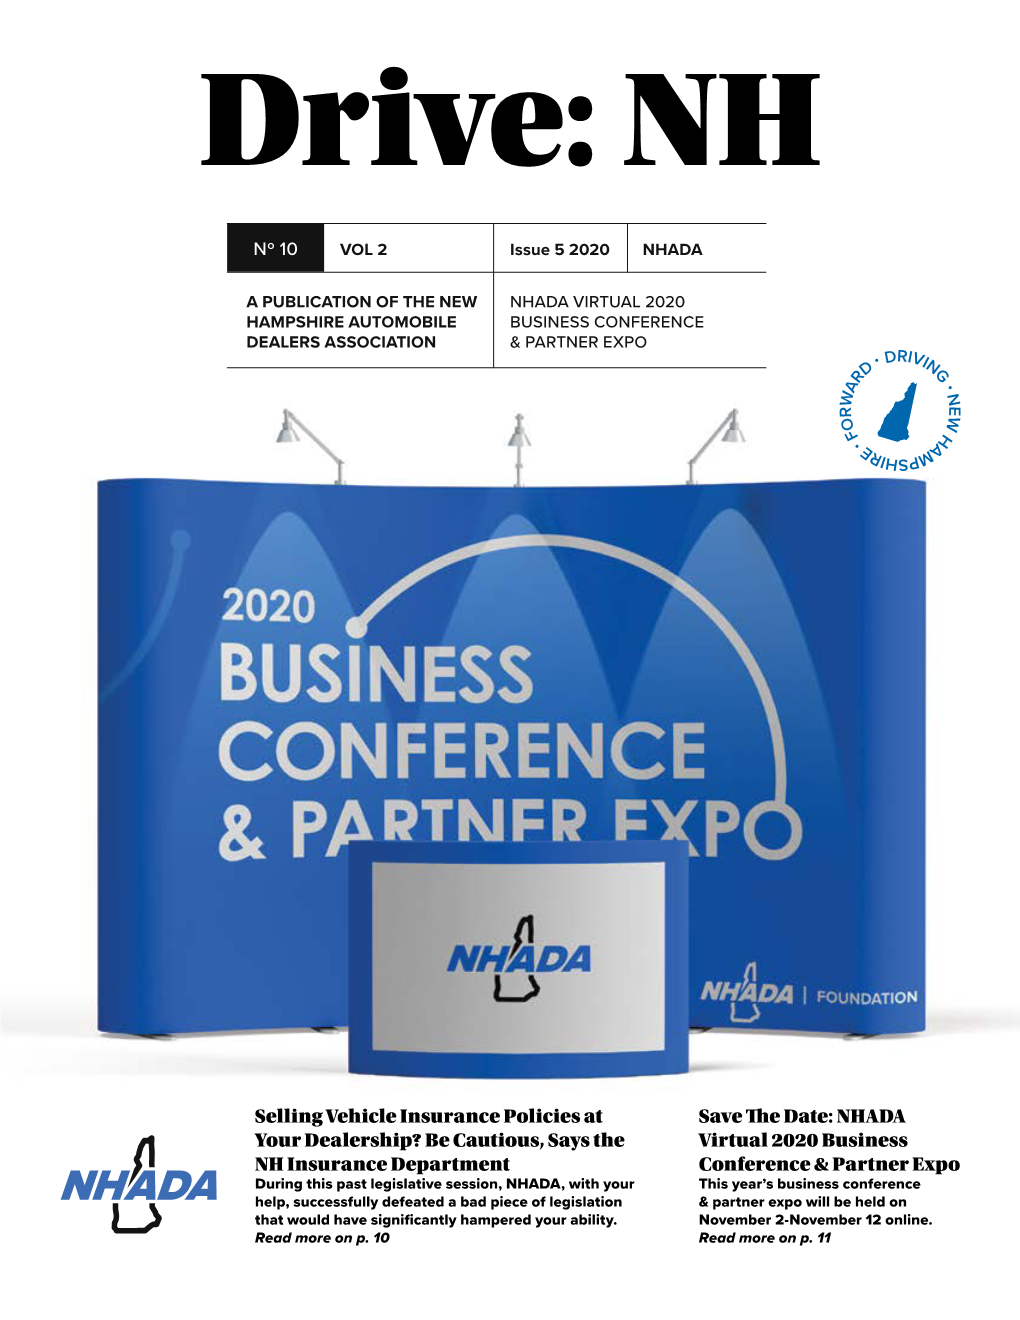 NHADA Virtual 2020 Business Conference & Partner Expo Selling